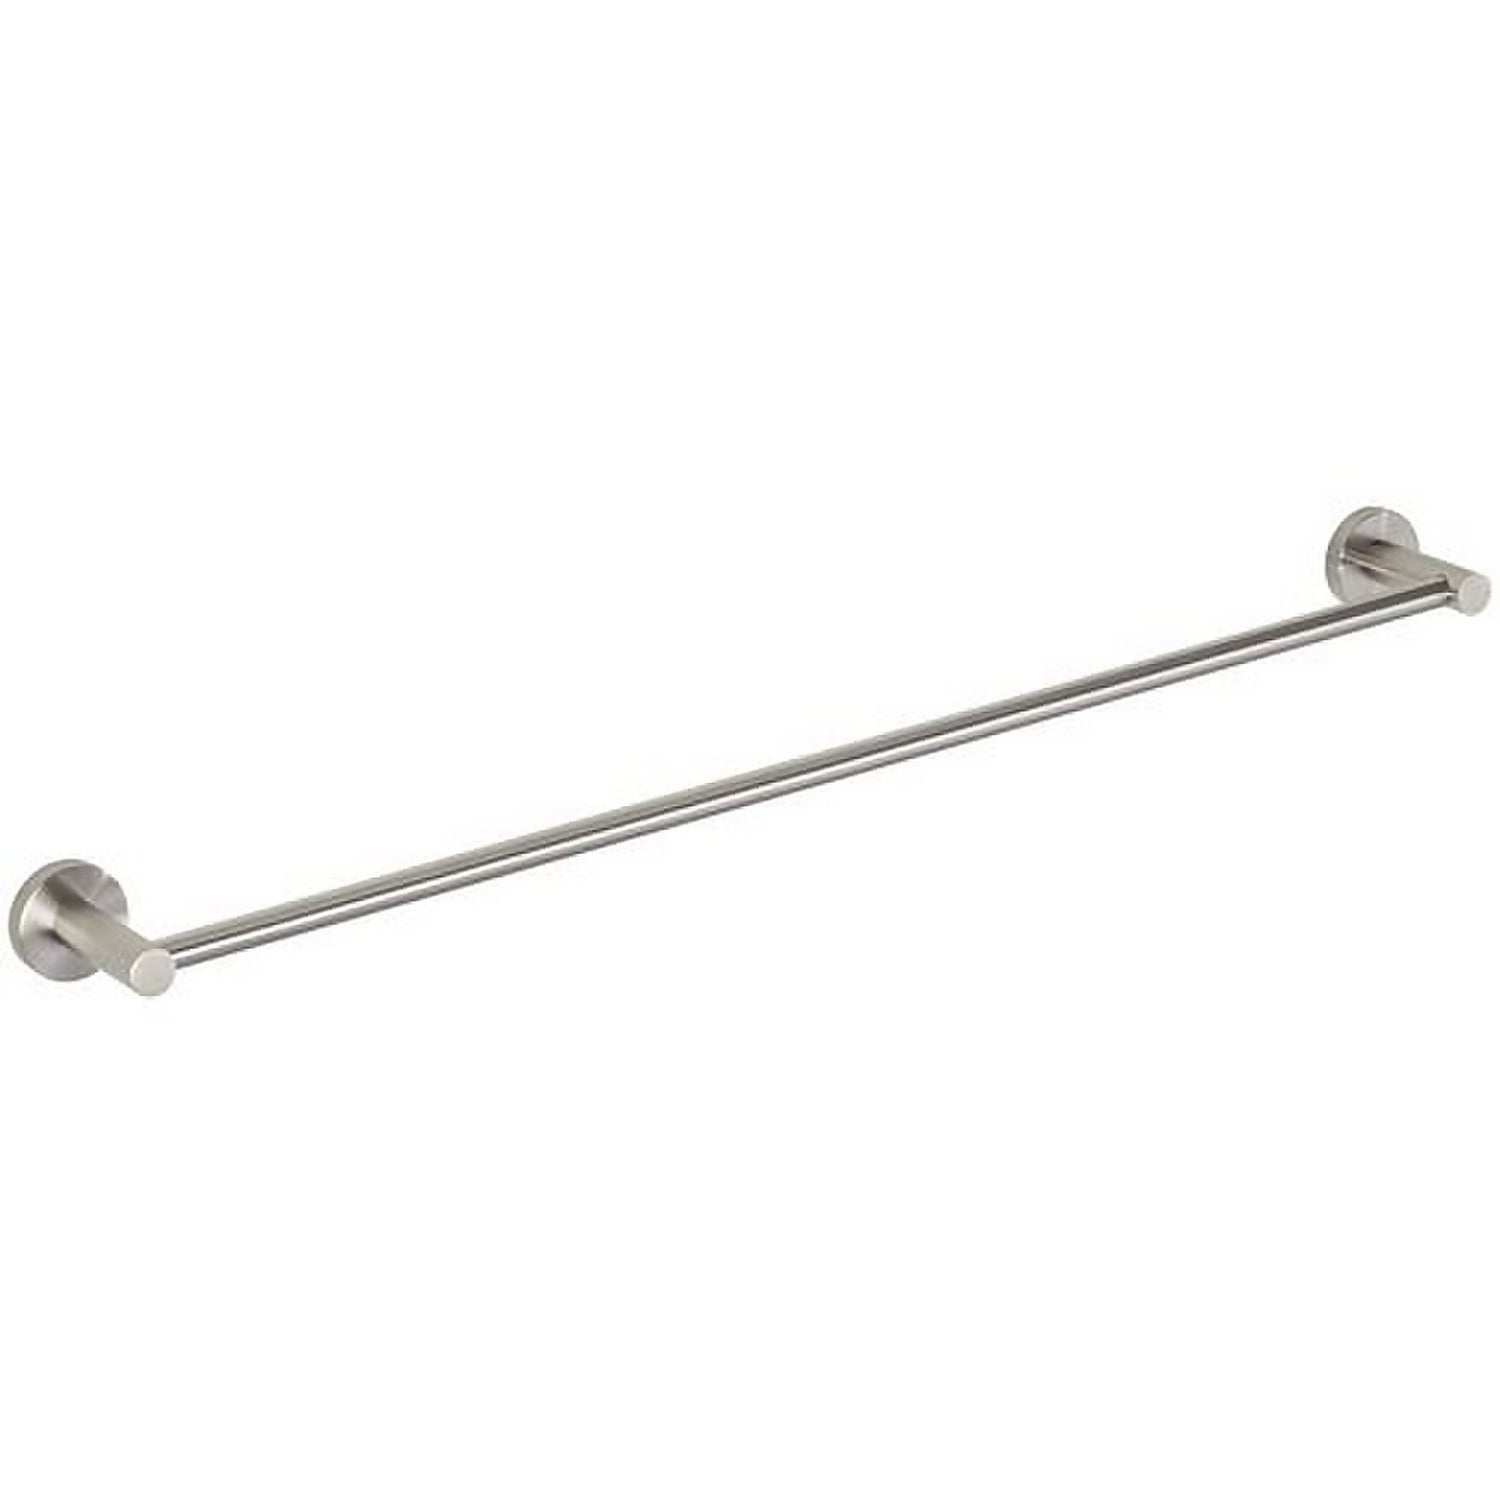 Forge Stainless Steel Single Towel Rail